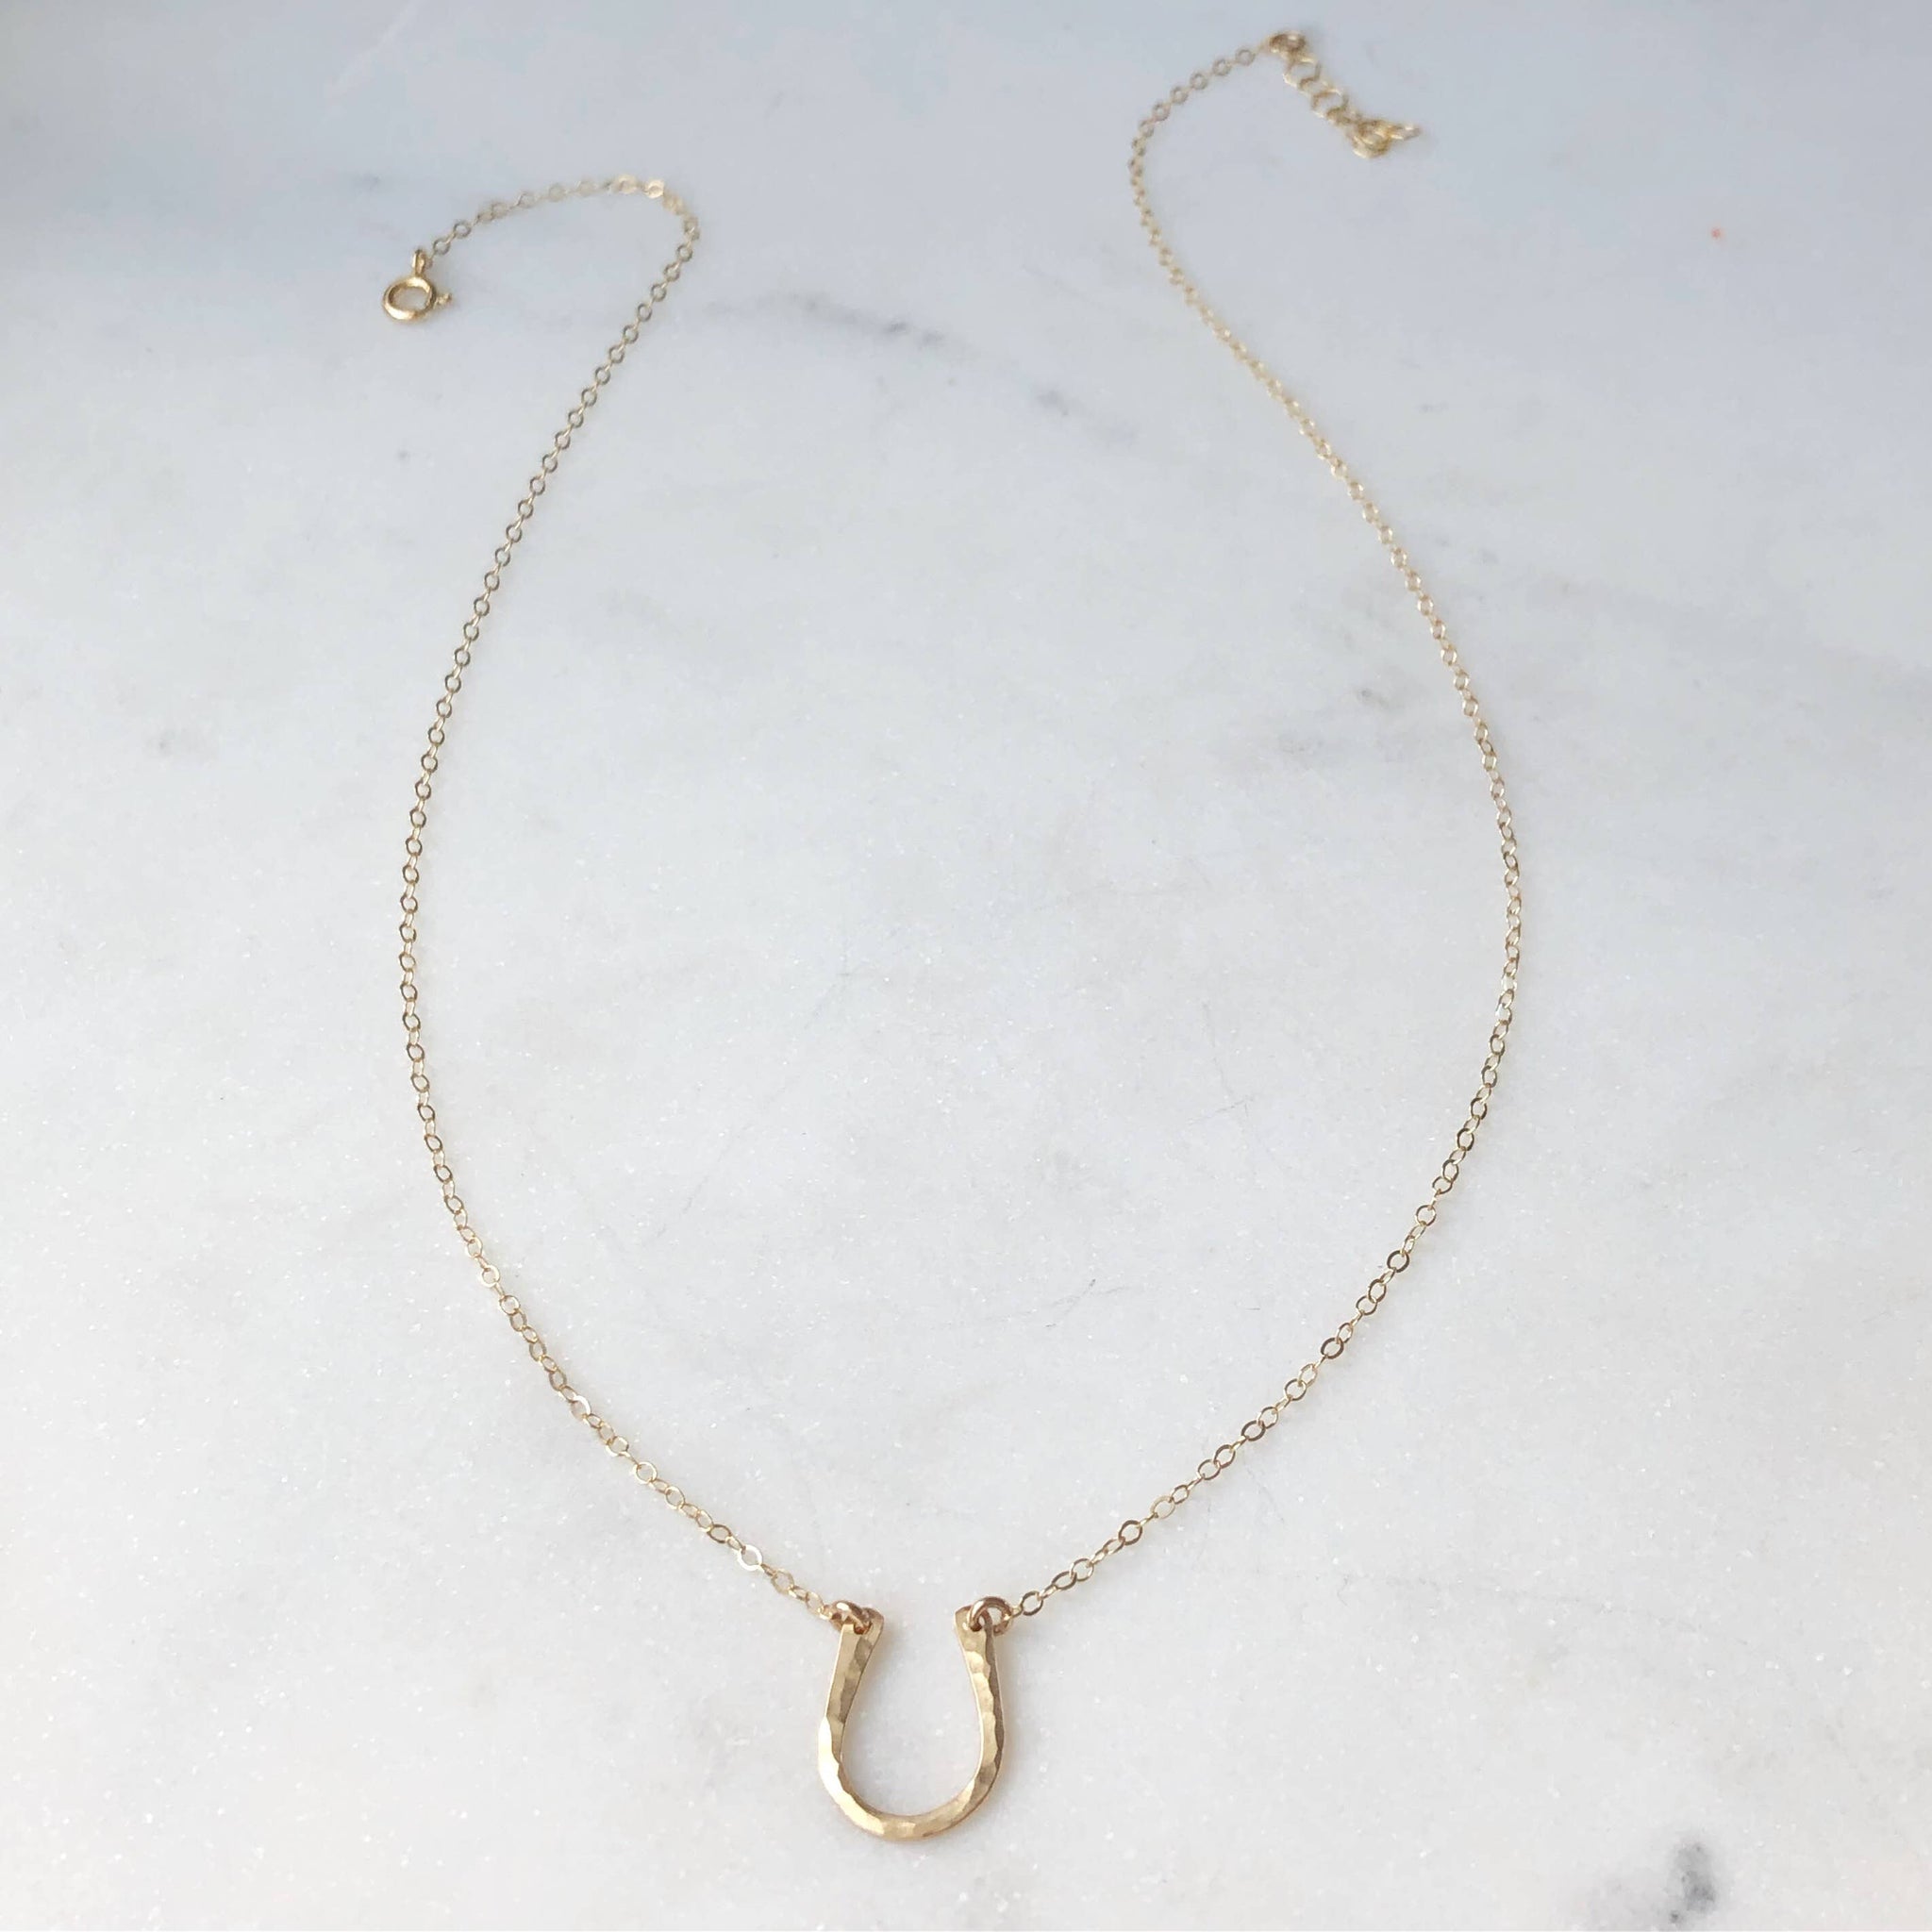 Token Lucky Charm Necklace - 14K Gold Fill 16"